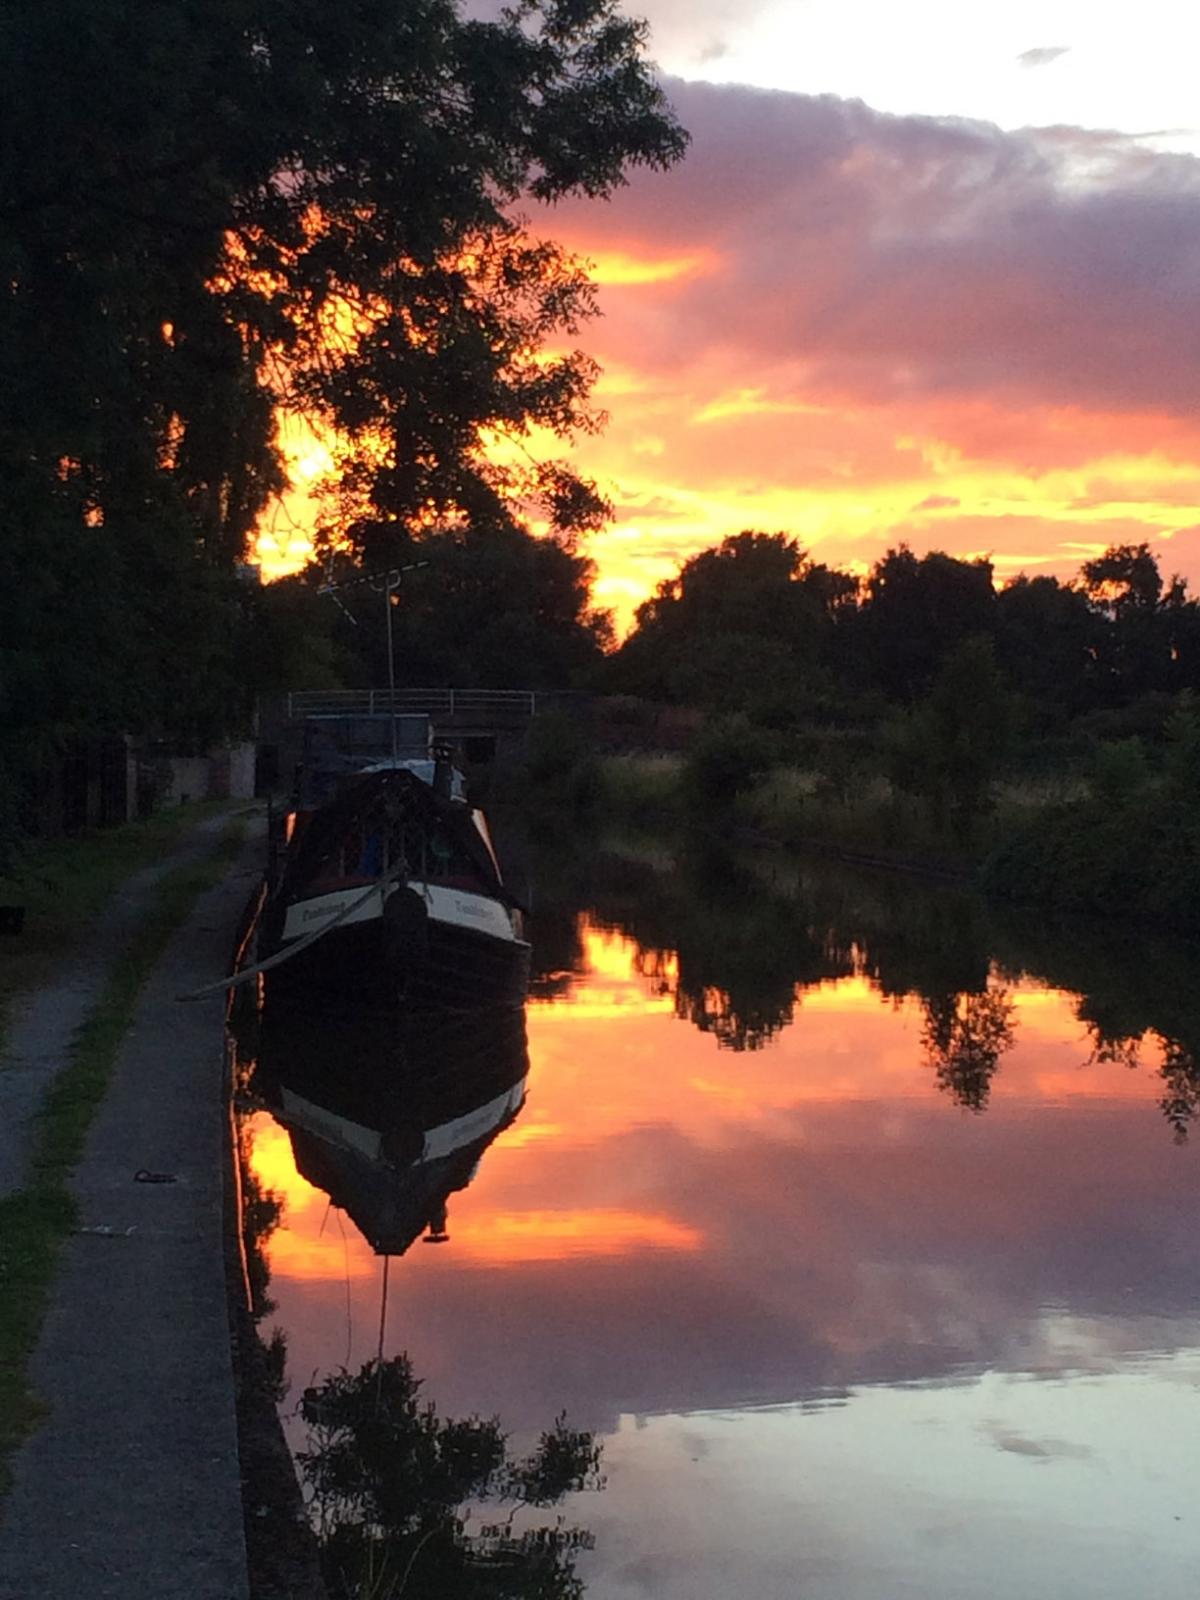 Andrew Lightfoot sent in this lovely picture of the sun setting over the Trent and Mersey Canal, next to the Lion Salt Works.